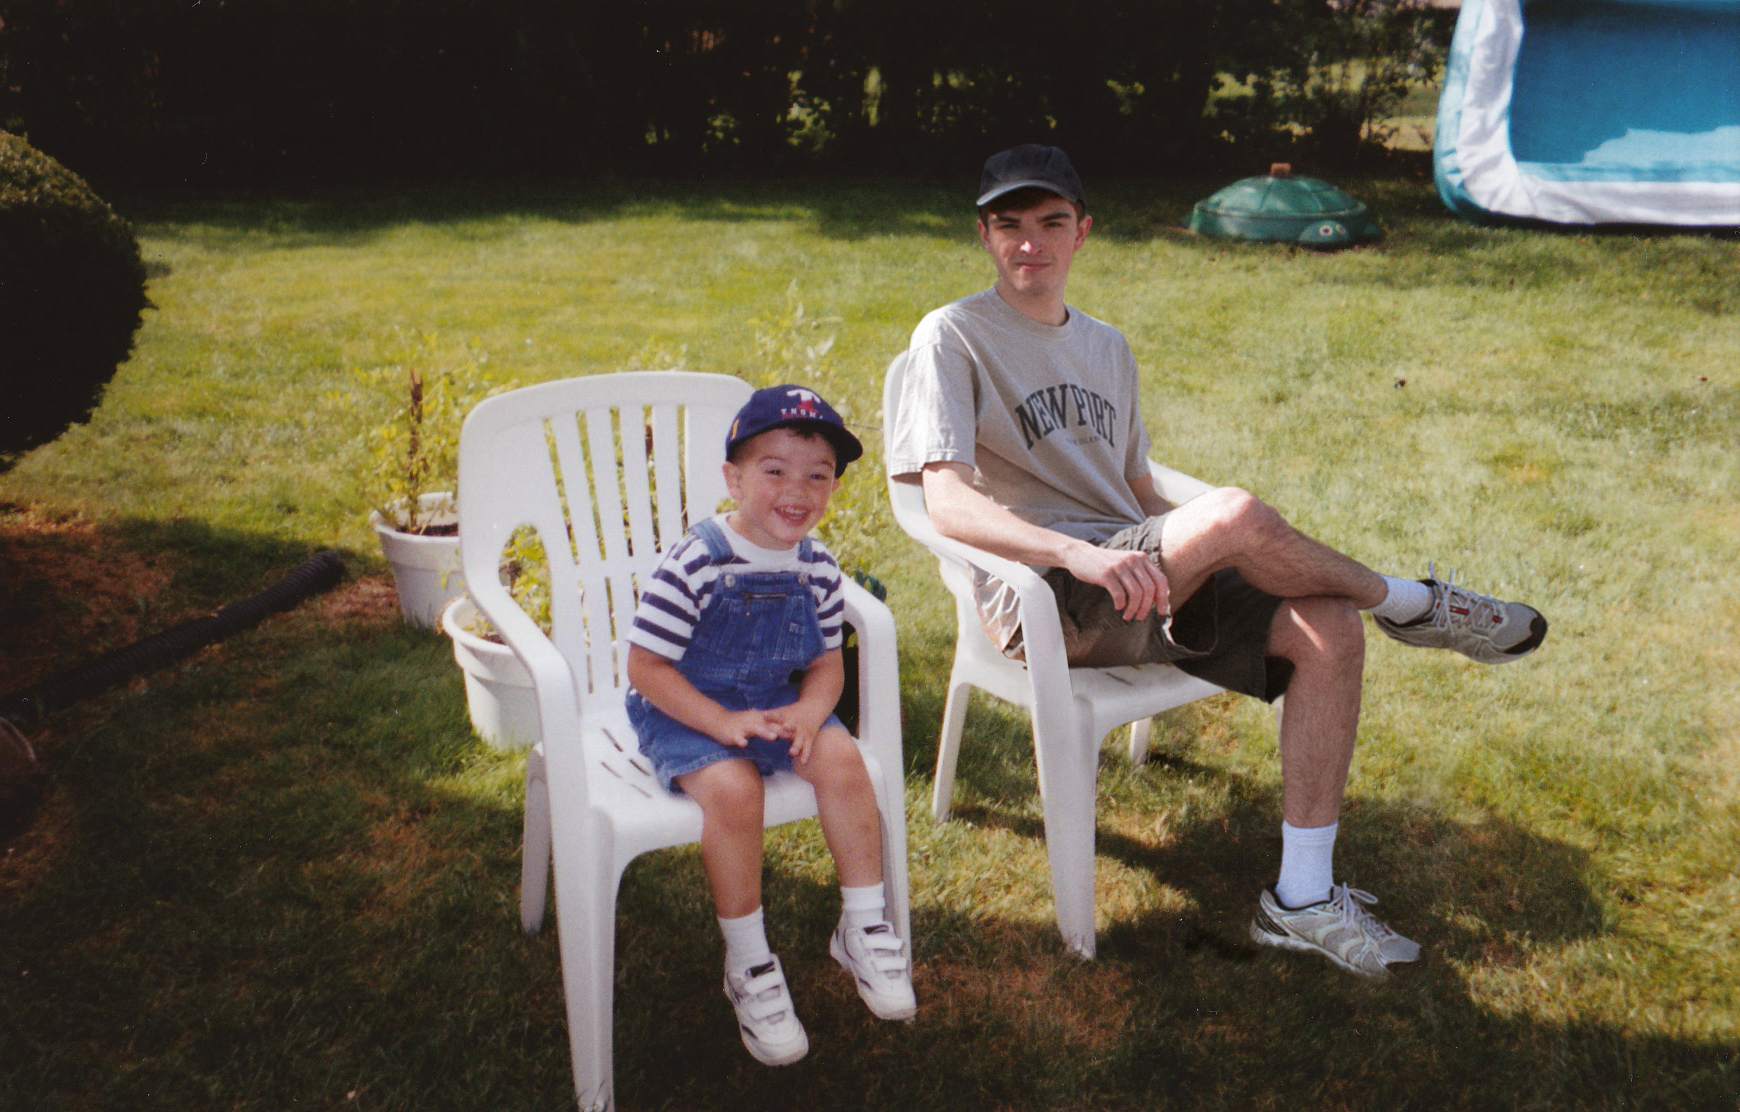 Conor and his younger self on chairs outside